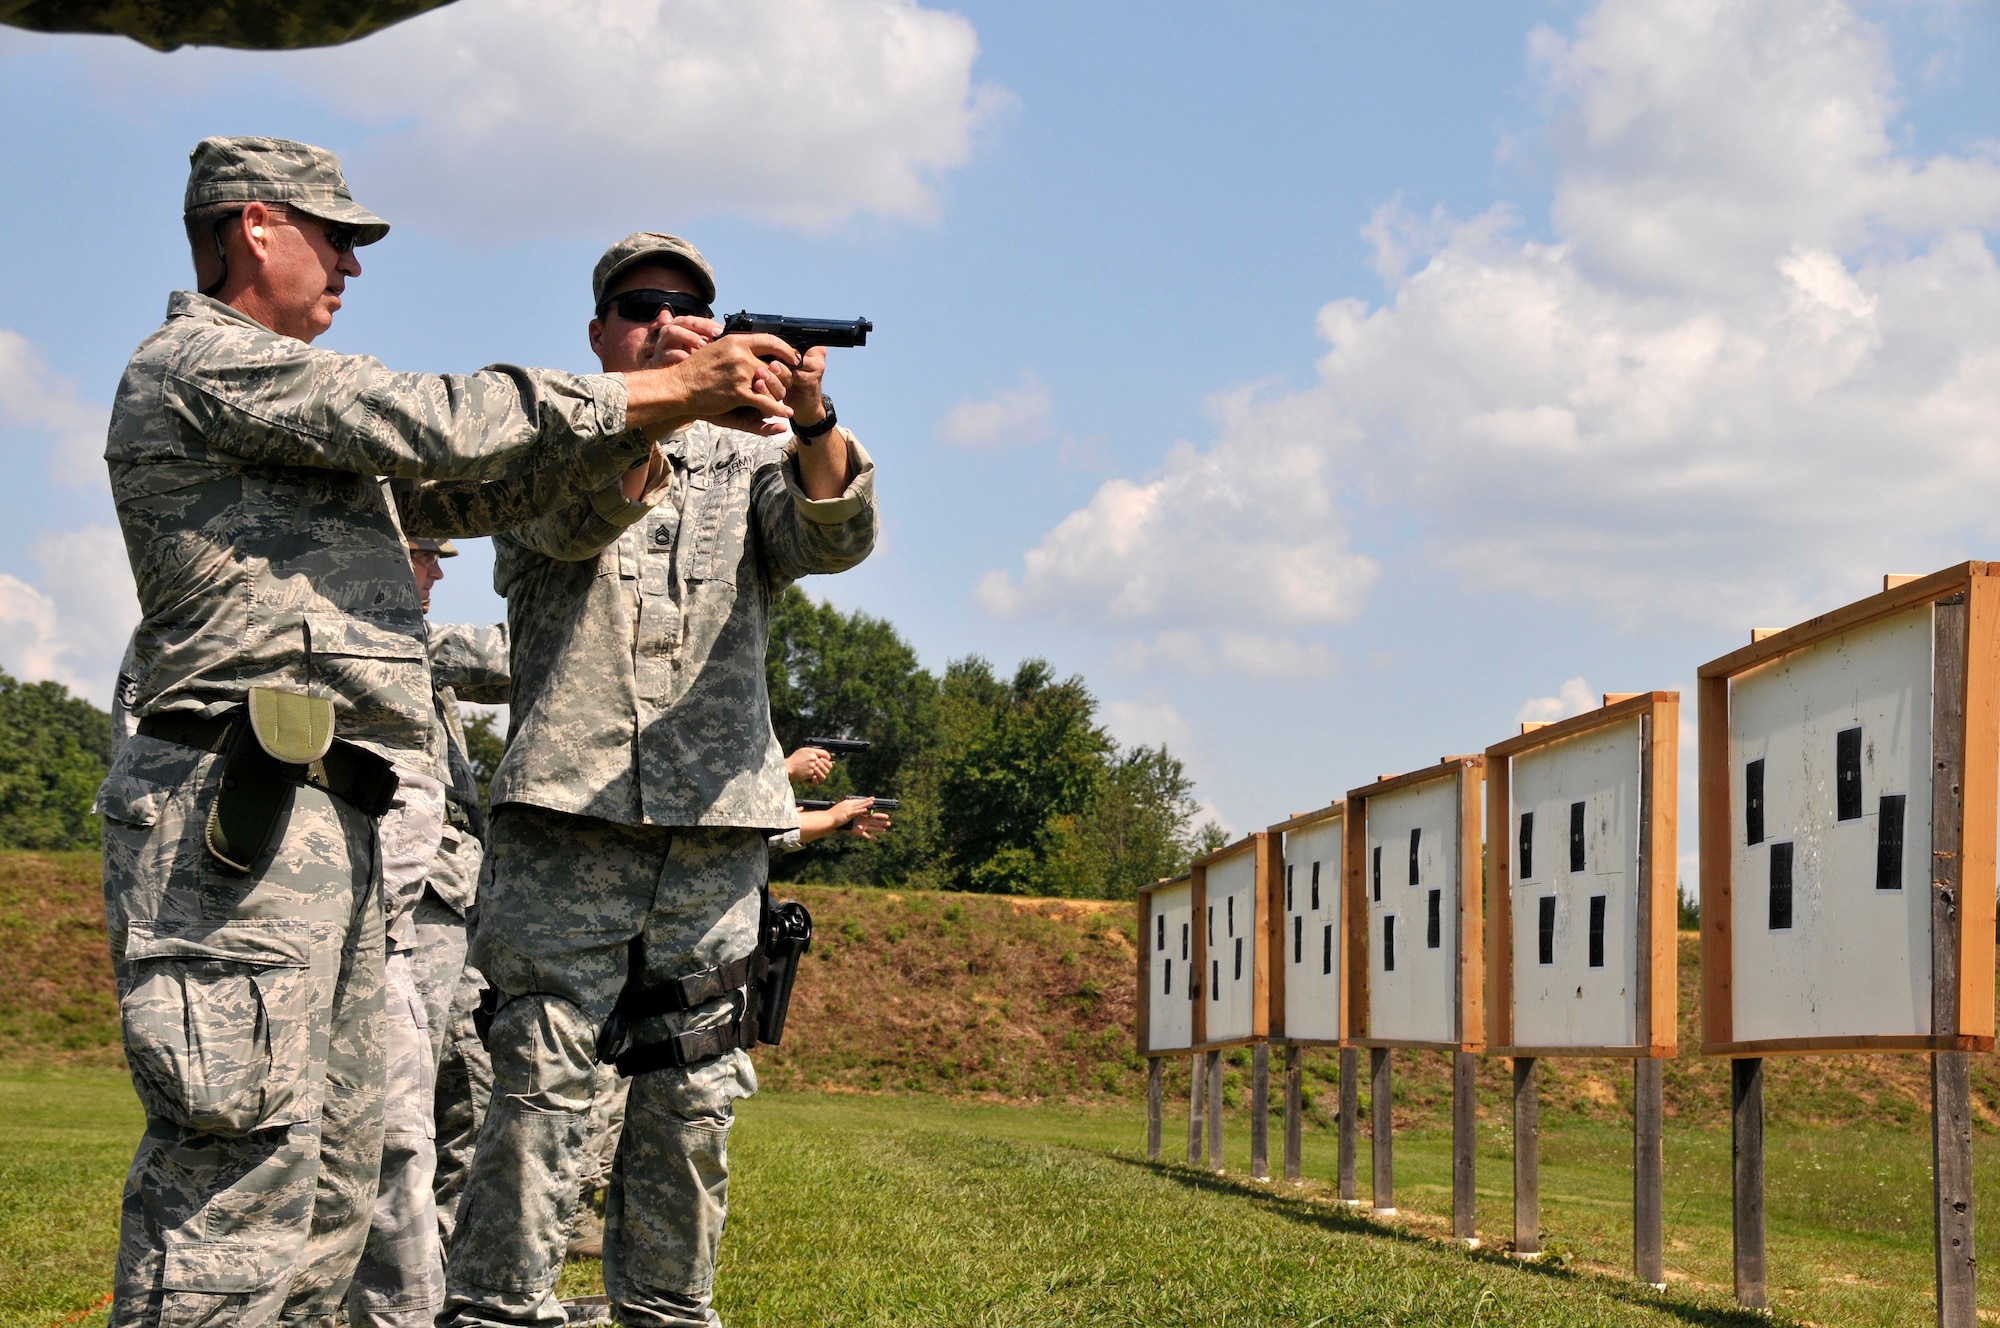 Brig. Gen. Donald Johnson, Tennessee Assistant Adjutant General, Air, is instructed on target acquisition  by Sergeant First Class Dave Keenom, TAG Match instructor and award winning pistol Champion, during a training session at the 2014 Tennessee Adjutant General Marksmanship Pistol Match in Tullahoma, TN on Aug 15. The Tennesee TAG Match is held anually to promote marksmanship skills in the Army and Air National Guard.  (U.S. Air National Guard photo by Master Sgt. Kendra M. Owenby, 134 ARW Public Affairs)